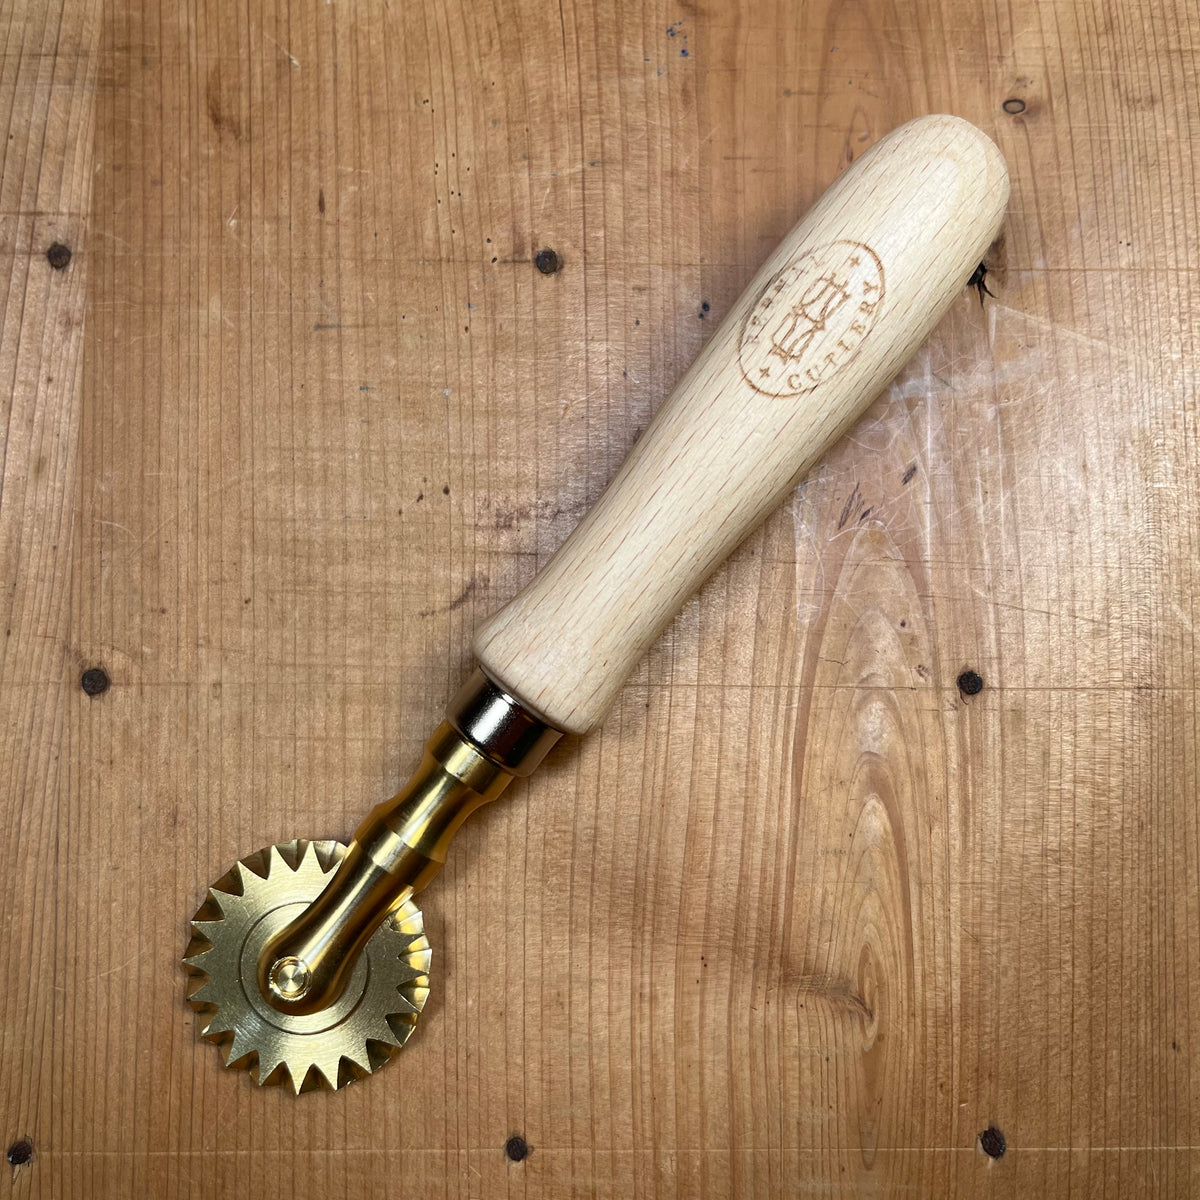 Pasta Cutting Wheel with Brass Single-toothed Blade